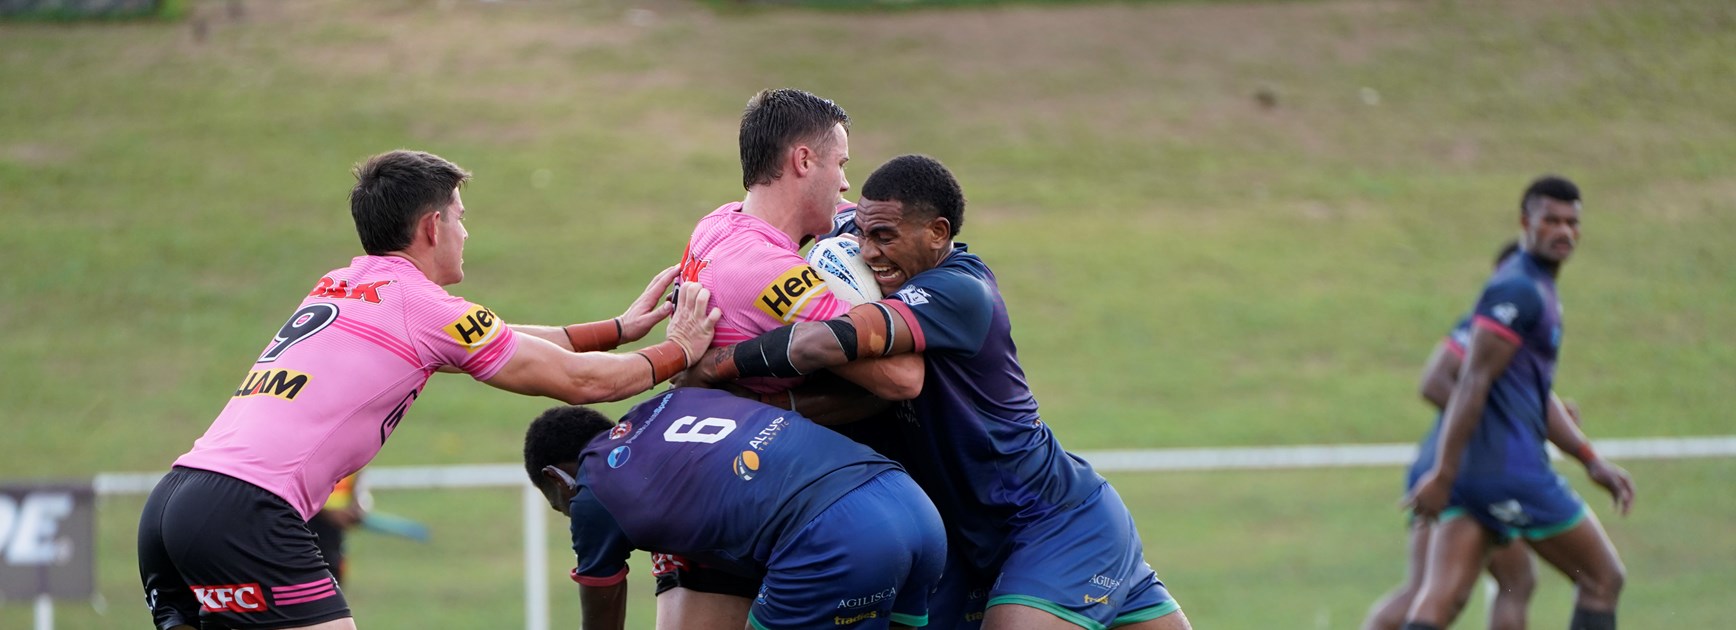 Penrith flex their muscles in Fiji